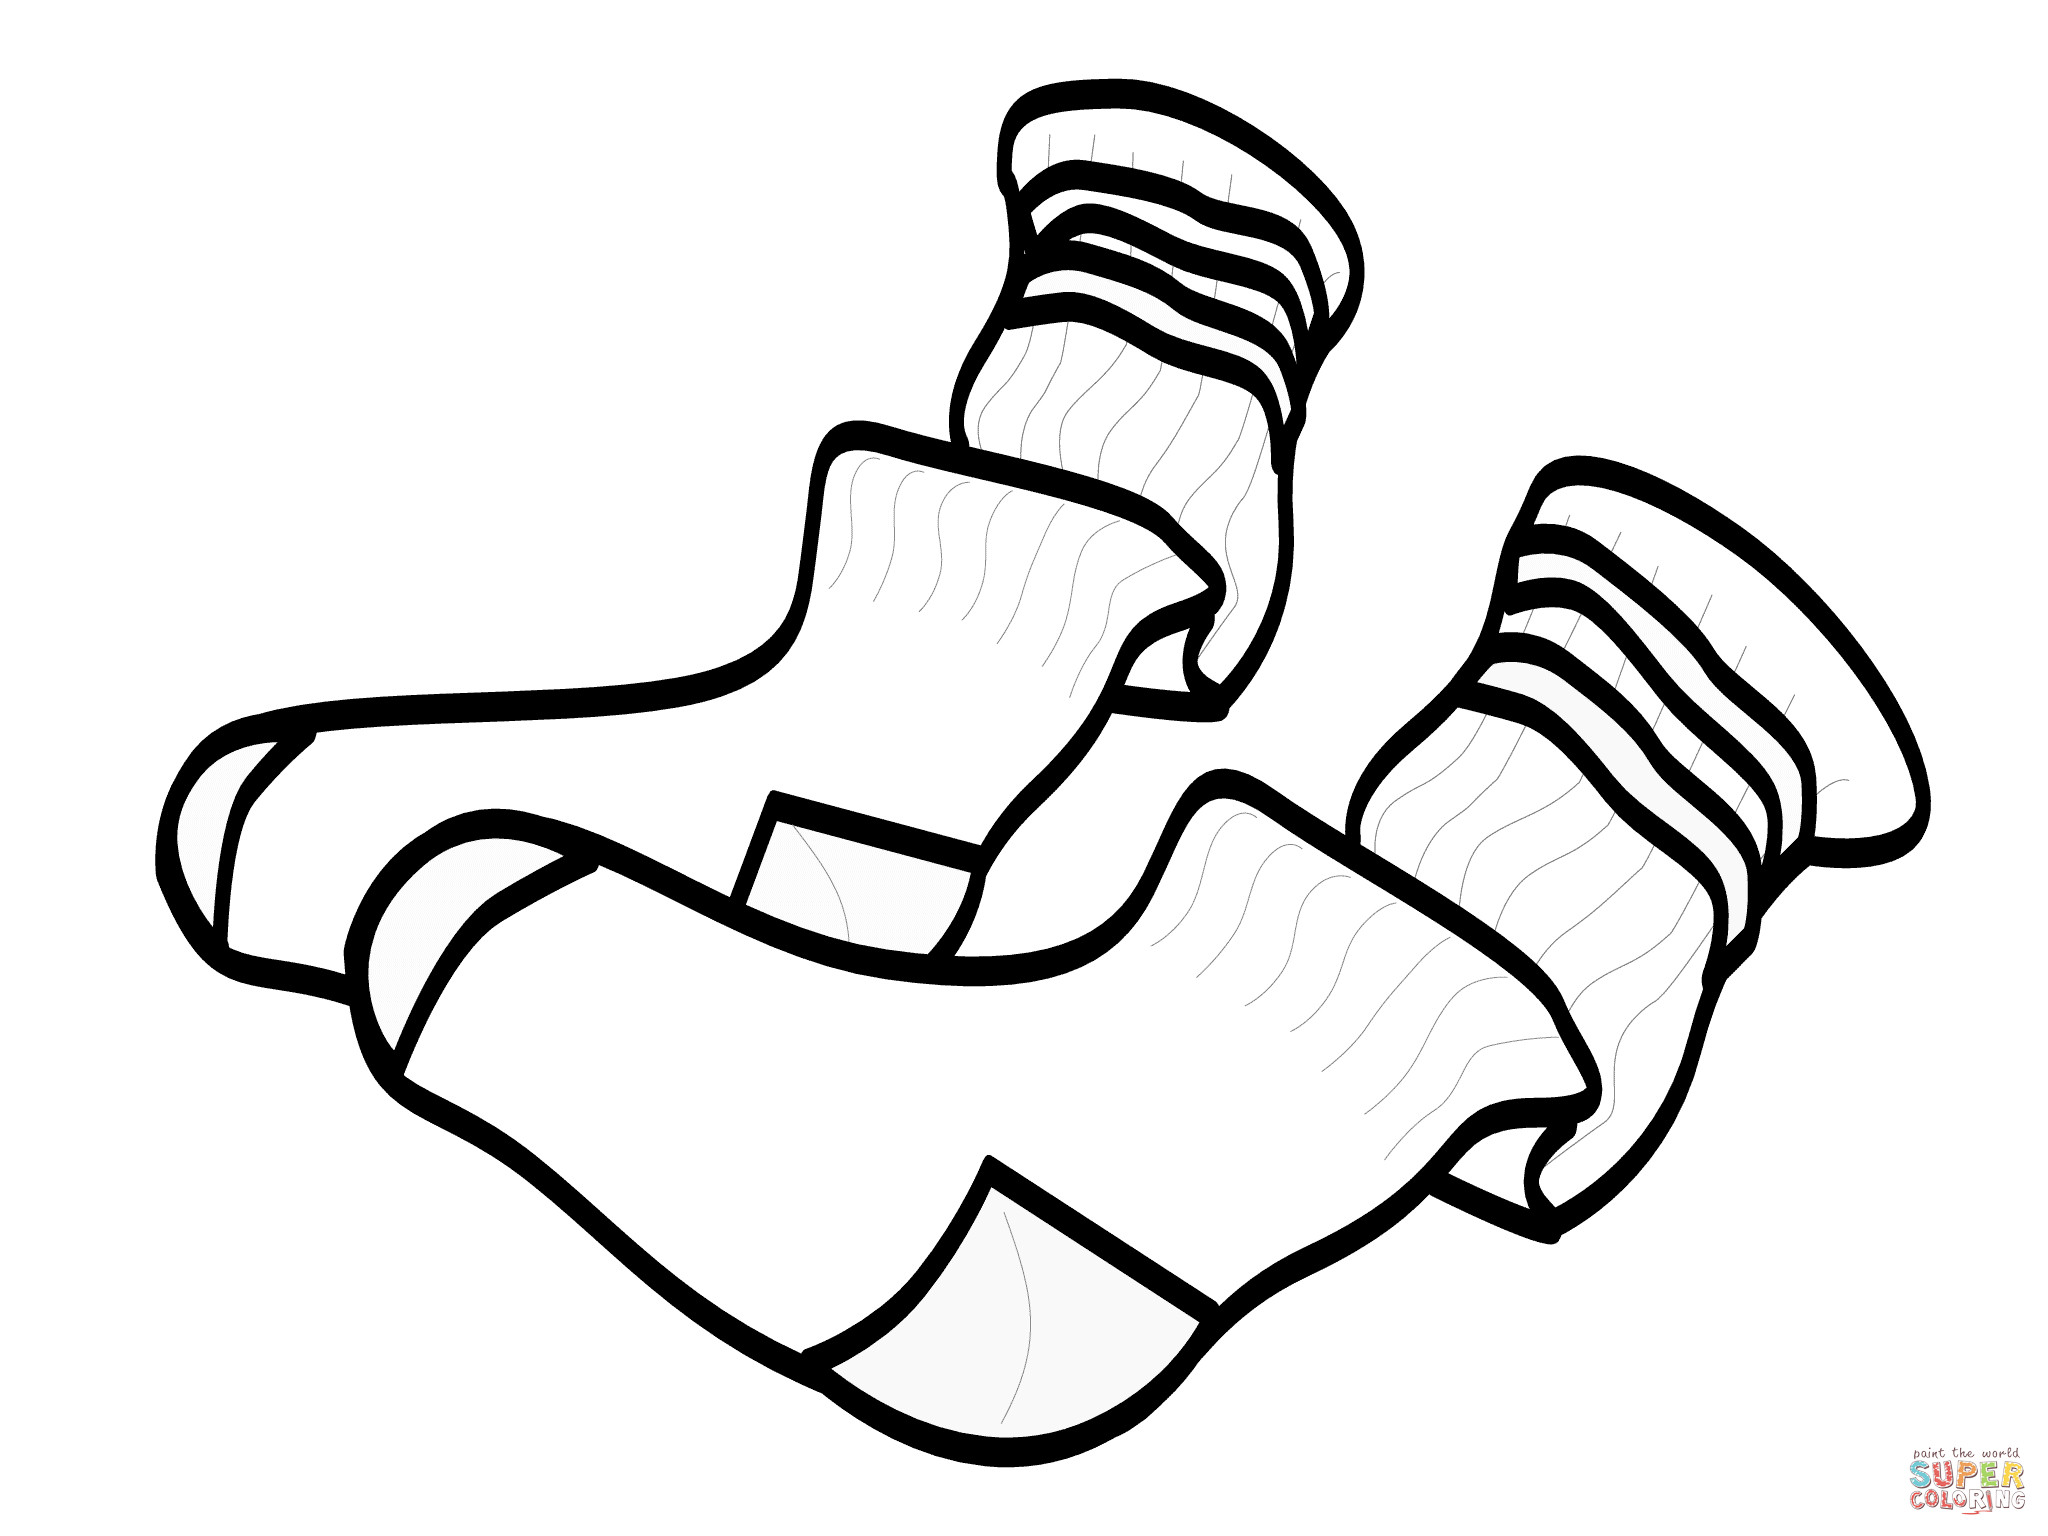 Best ideas about Socks Coloring Pages For Kids
. Save or Pin Socks coloring page Now.